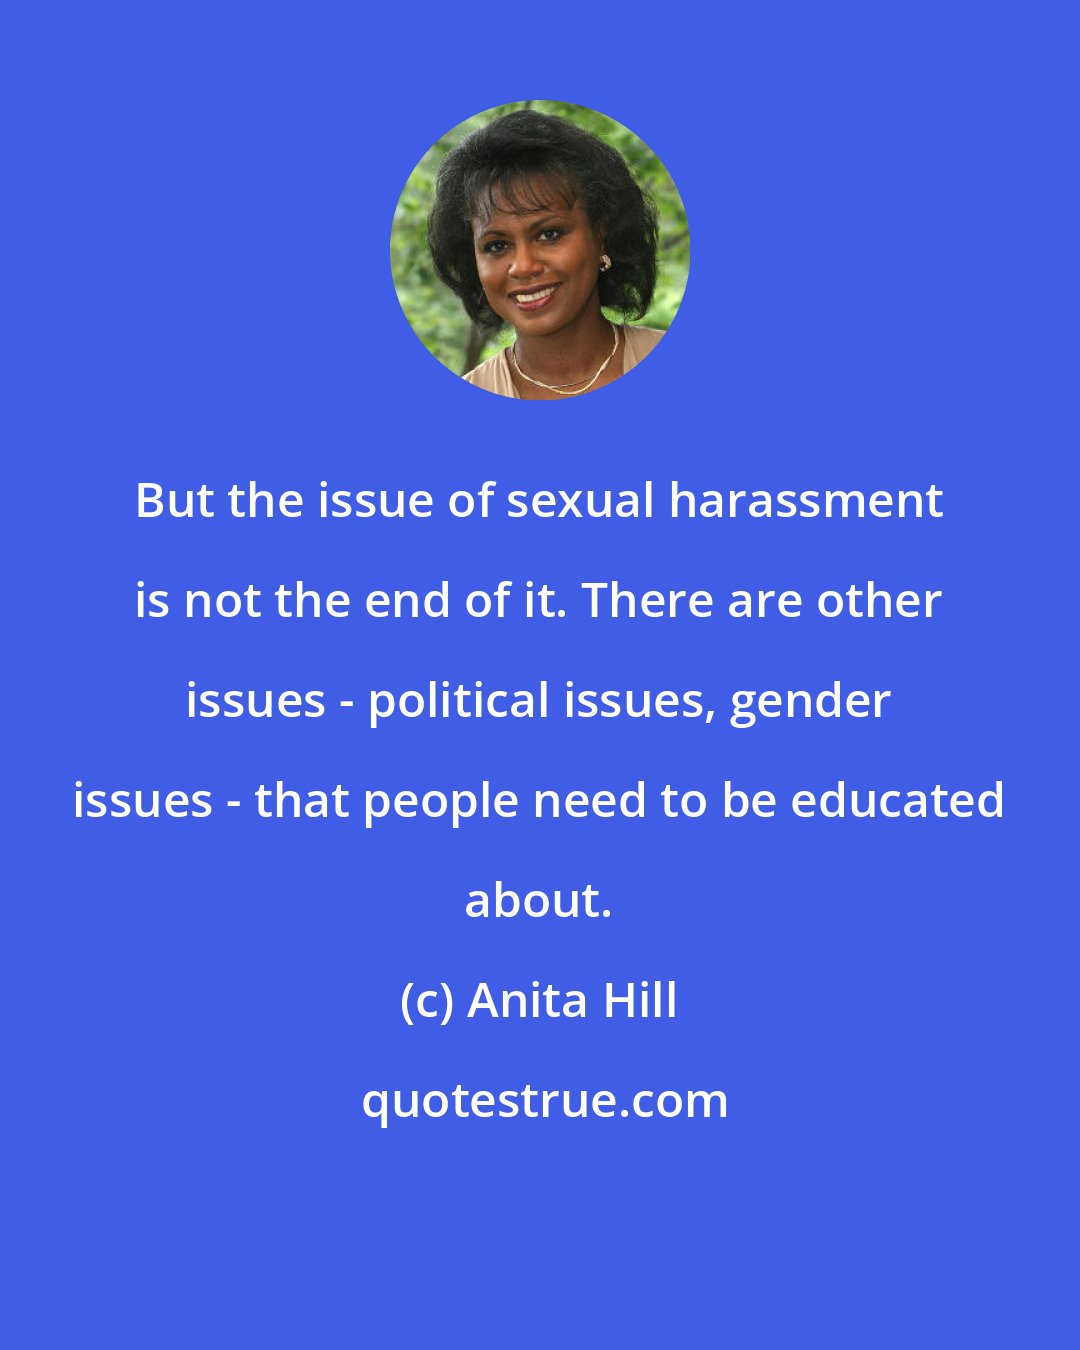 Anita Hill: But the issue of sexual harassment is not the end of it. There are other issues - political issues, gender issues - that people need to be educated about.